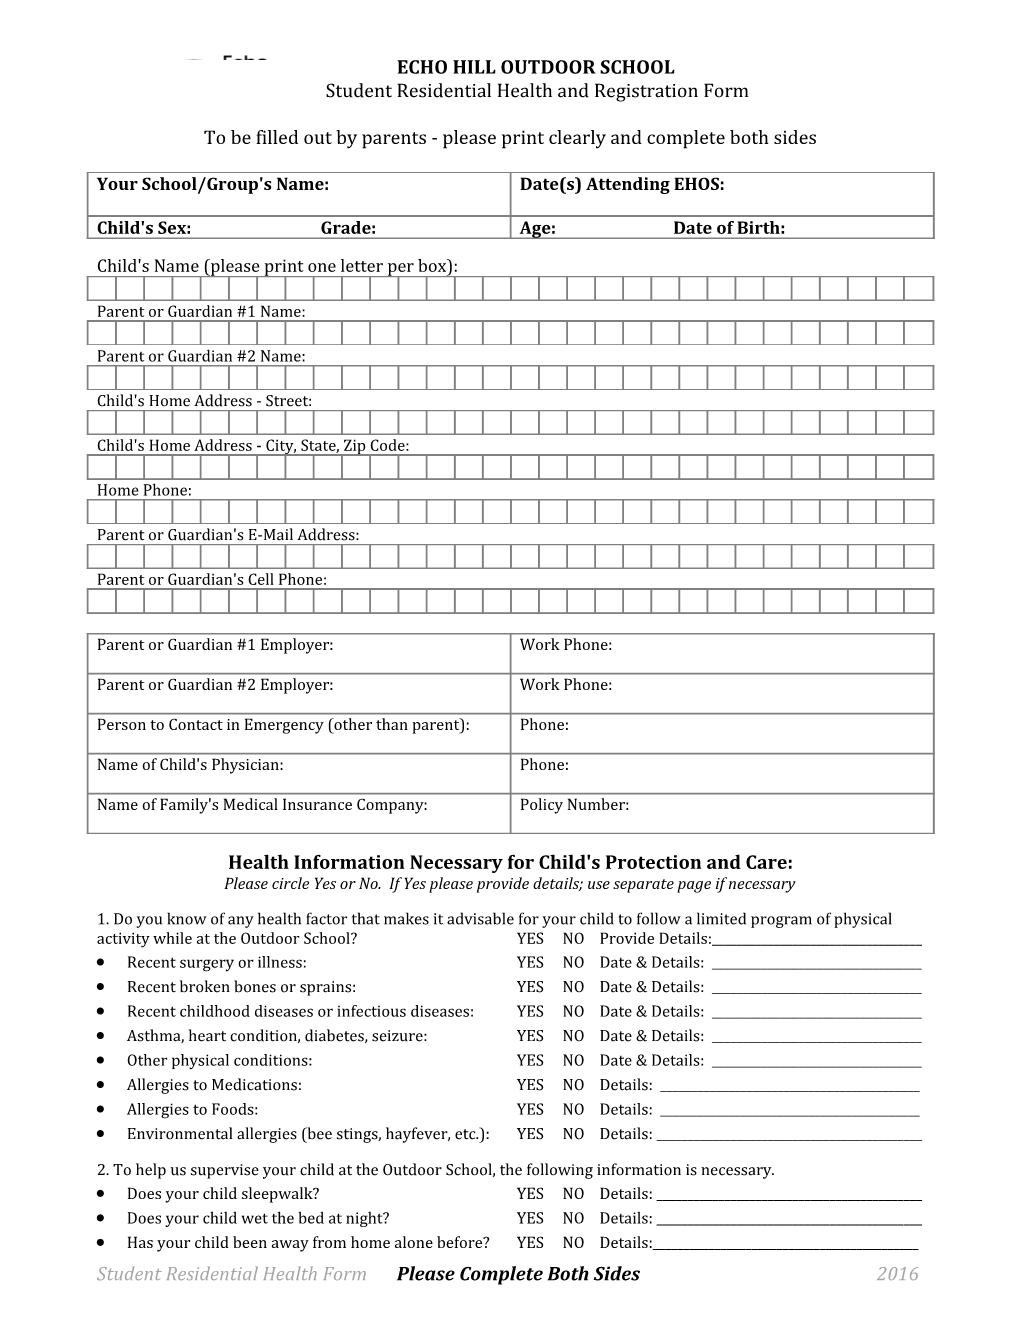 Student Residential Health and Registration Form